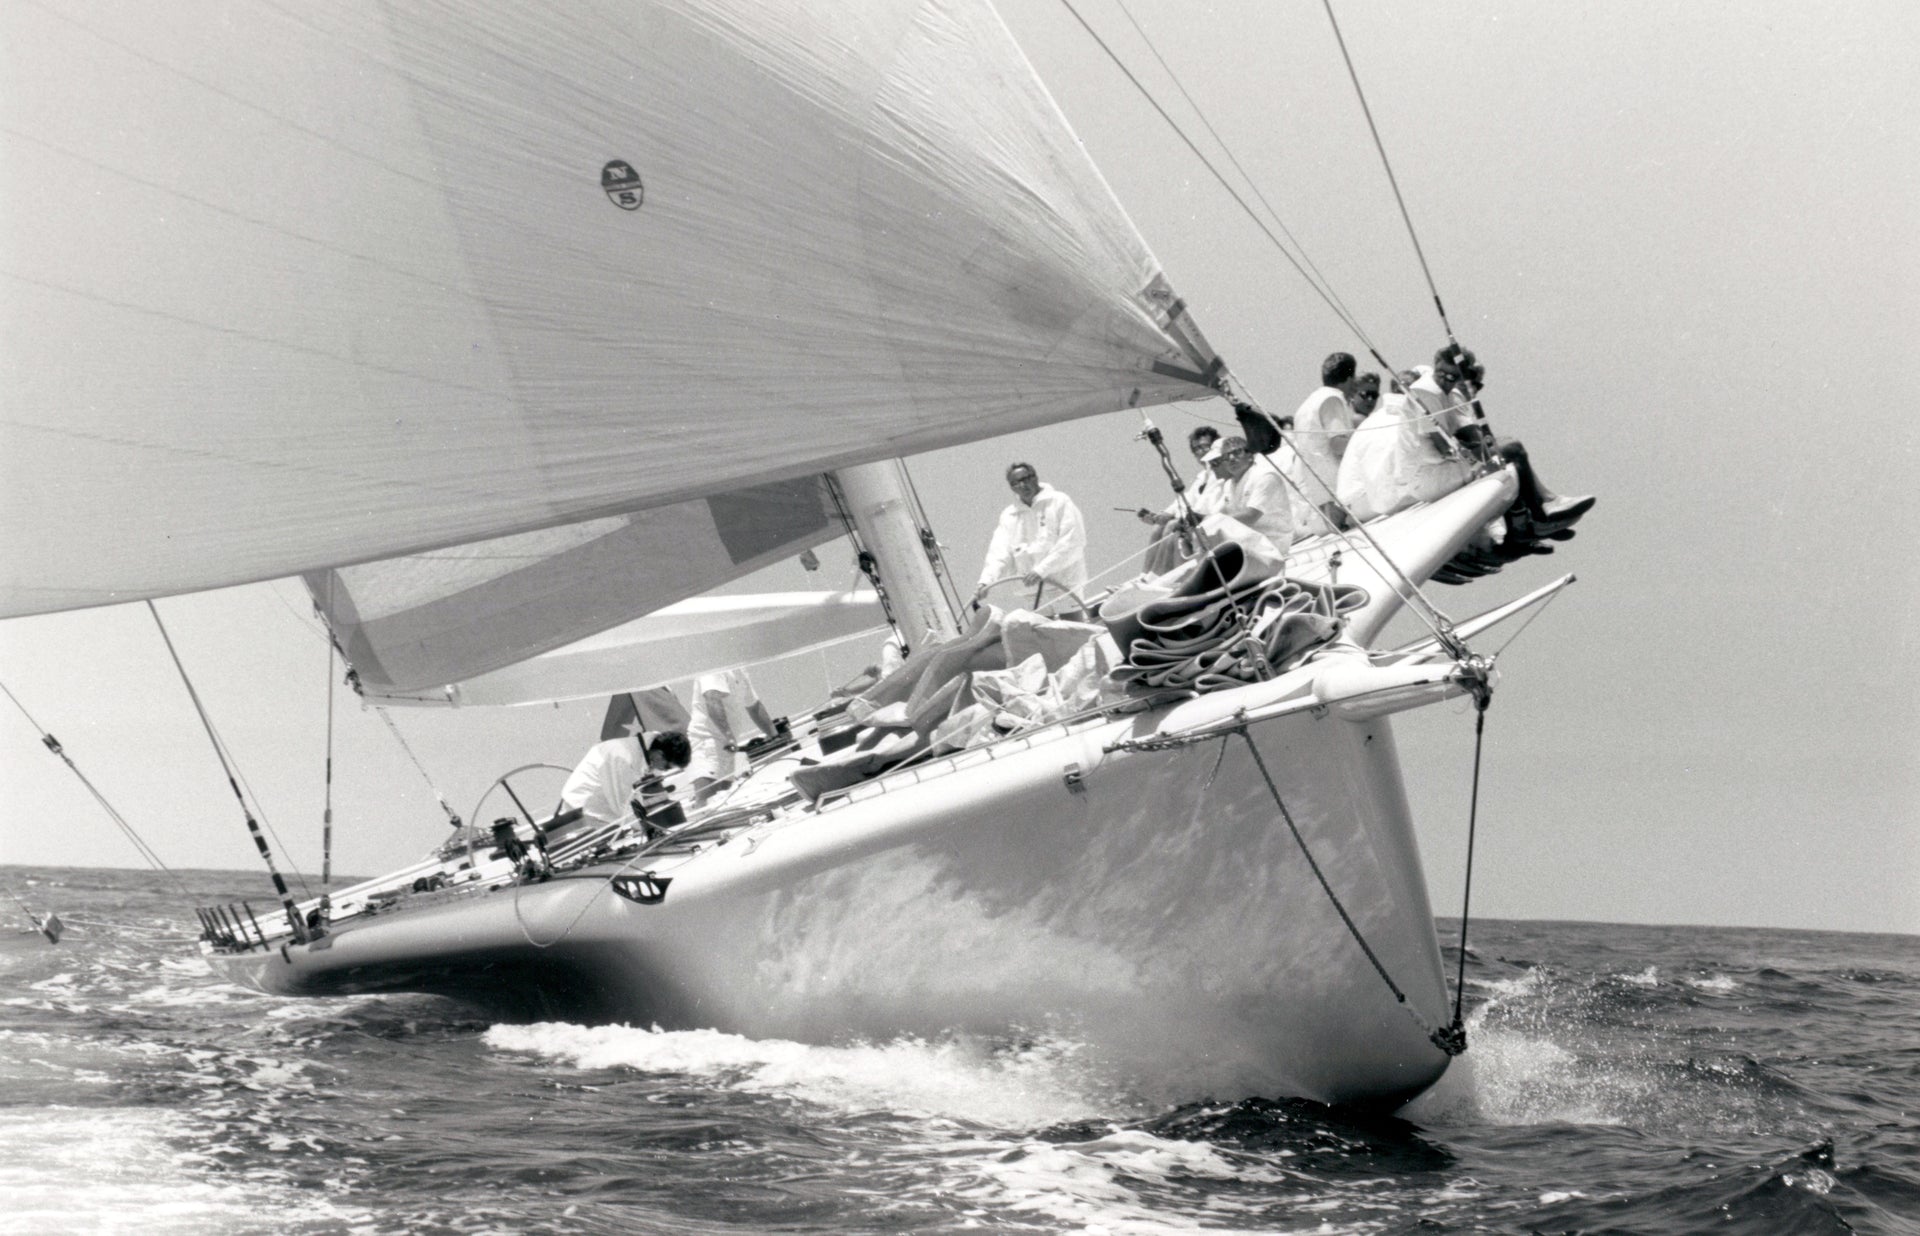 1988 - NORTH SAILS AND THE AMERICA